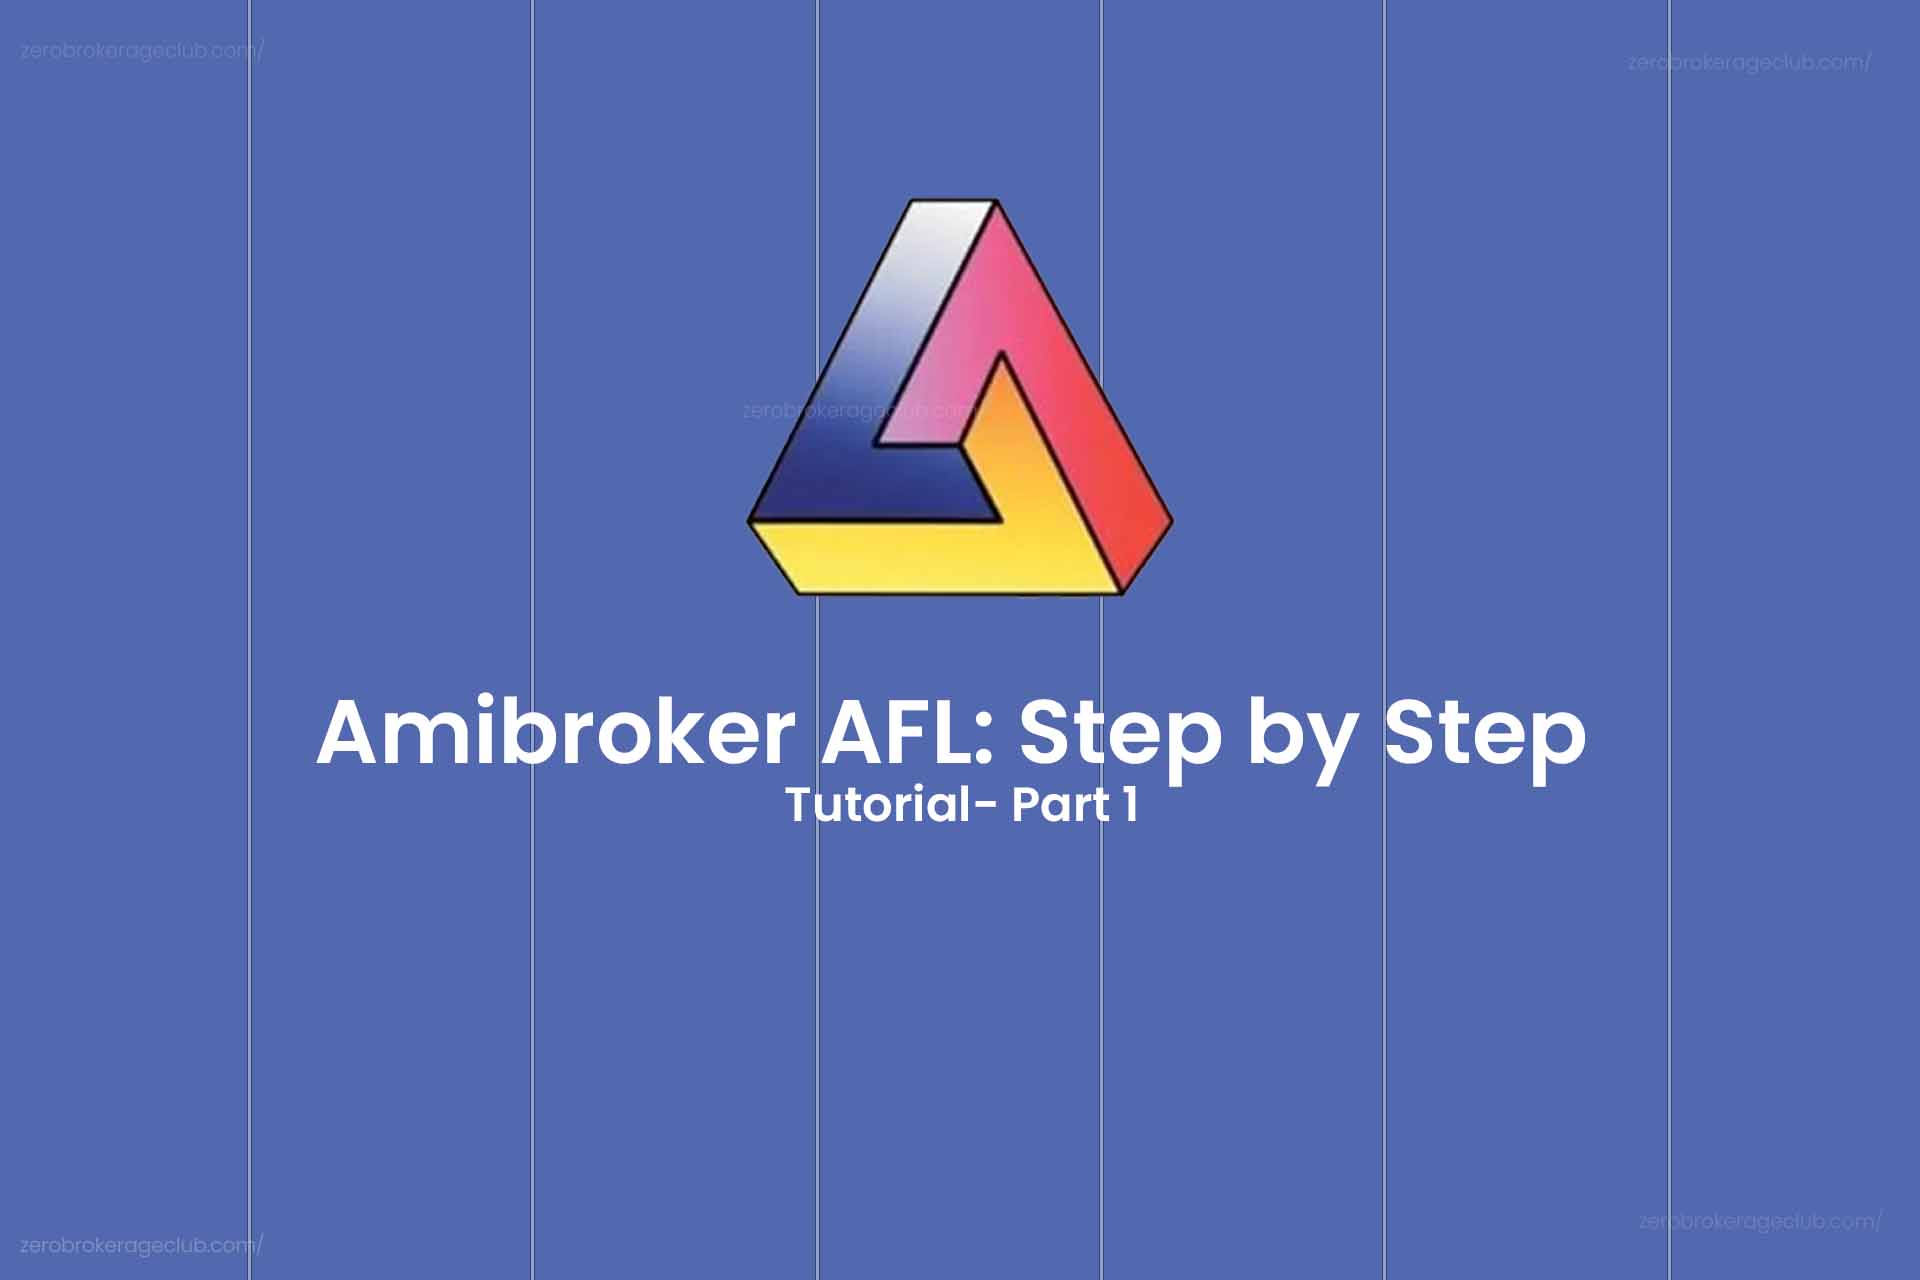 Amibroker AFL: Step by Step Tutorial- Part 1